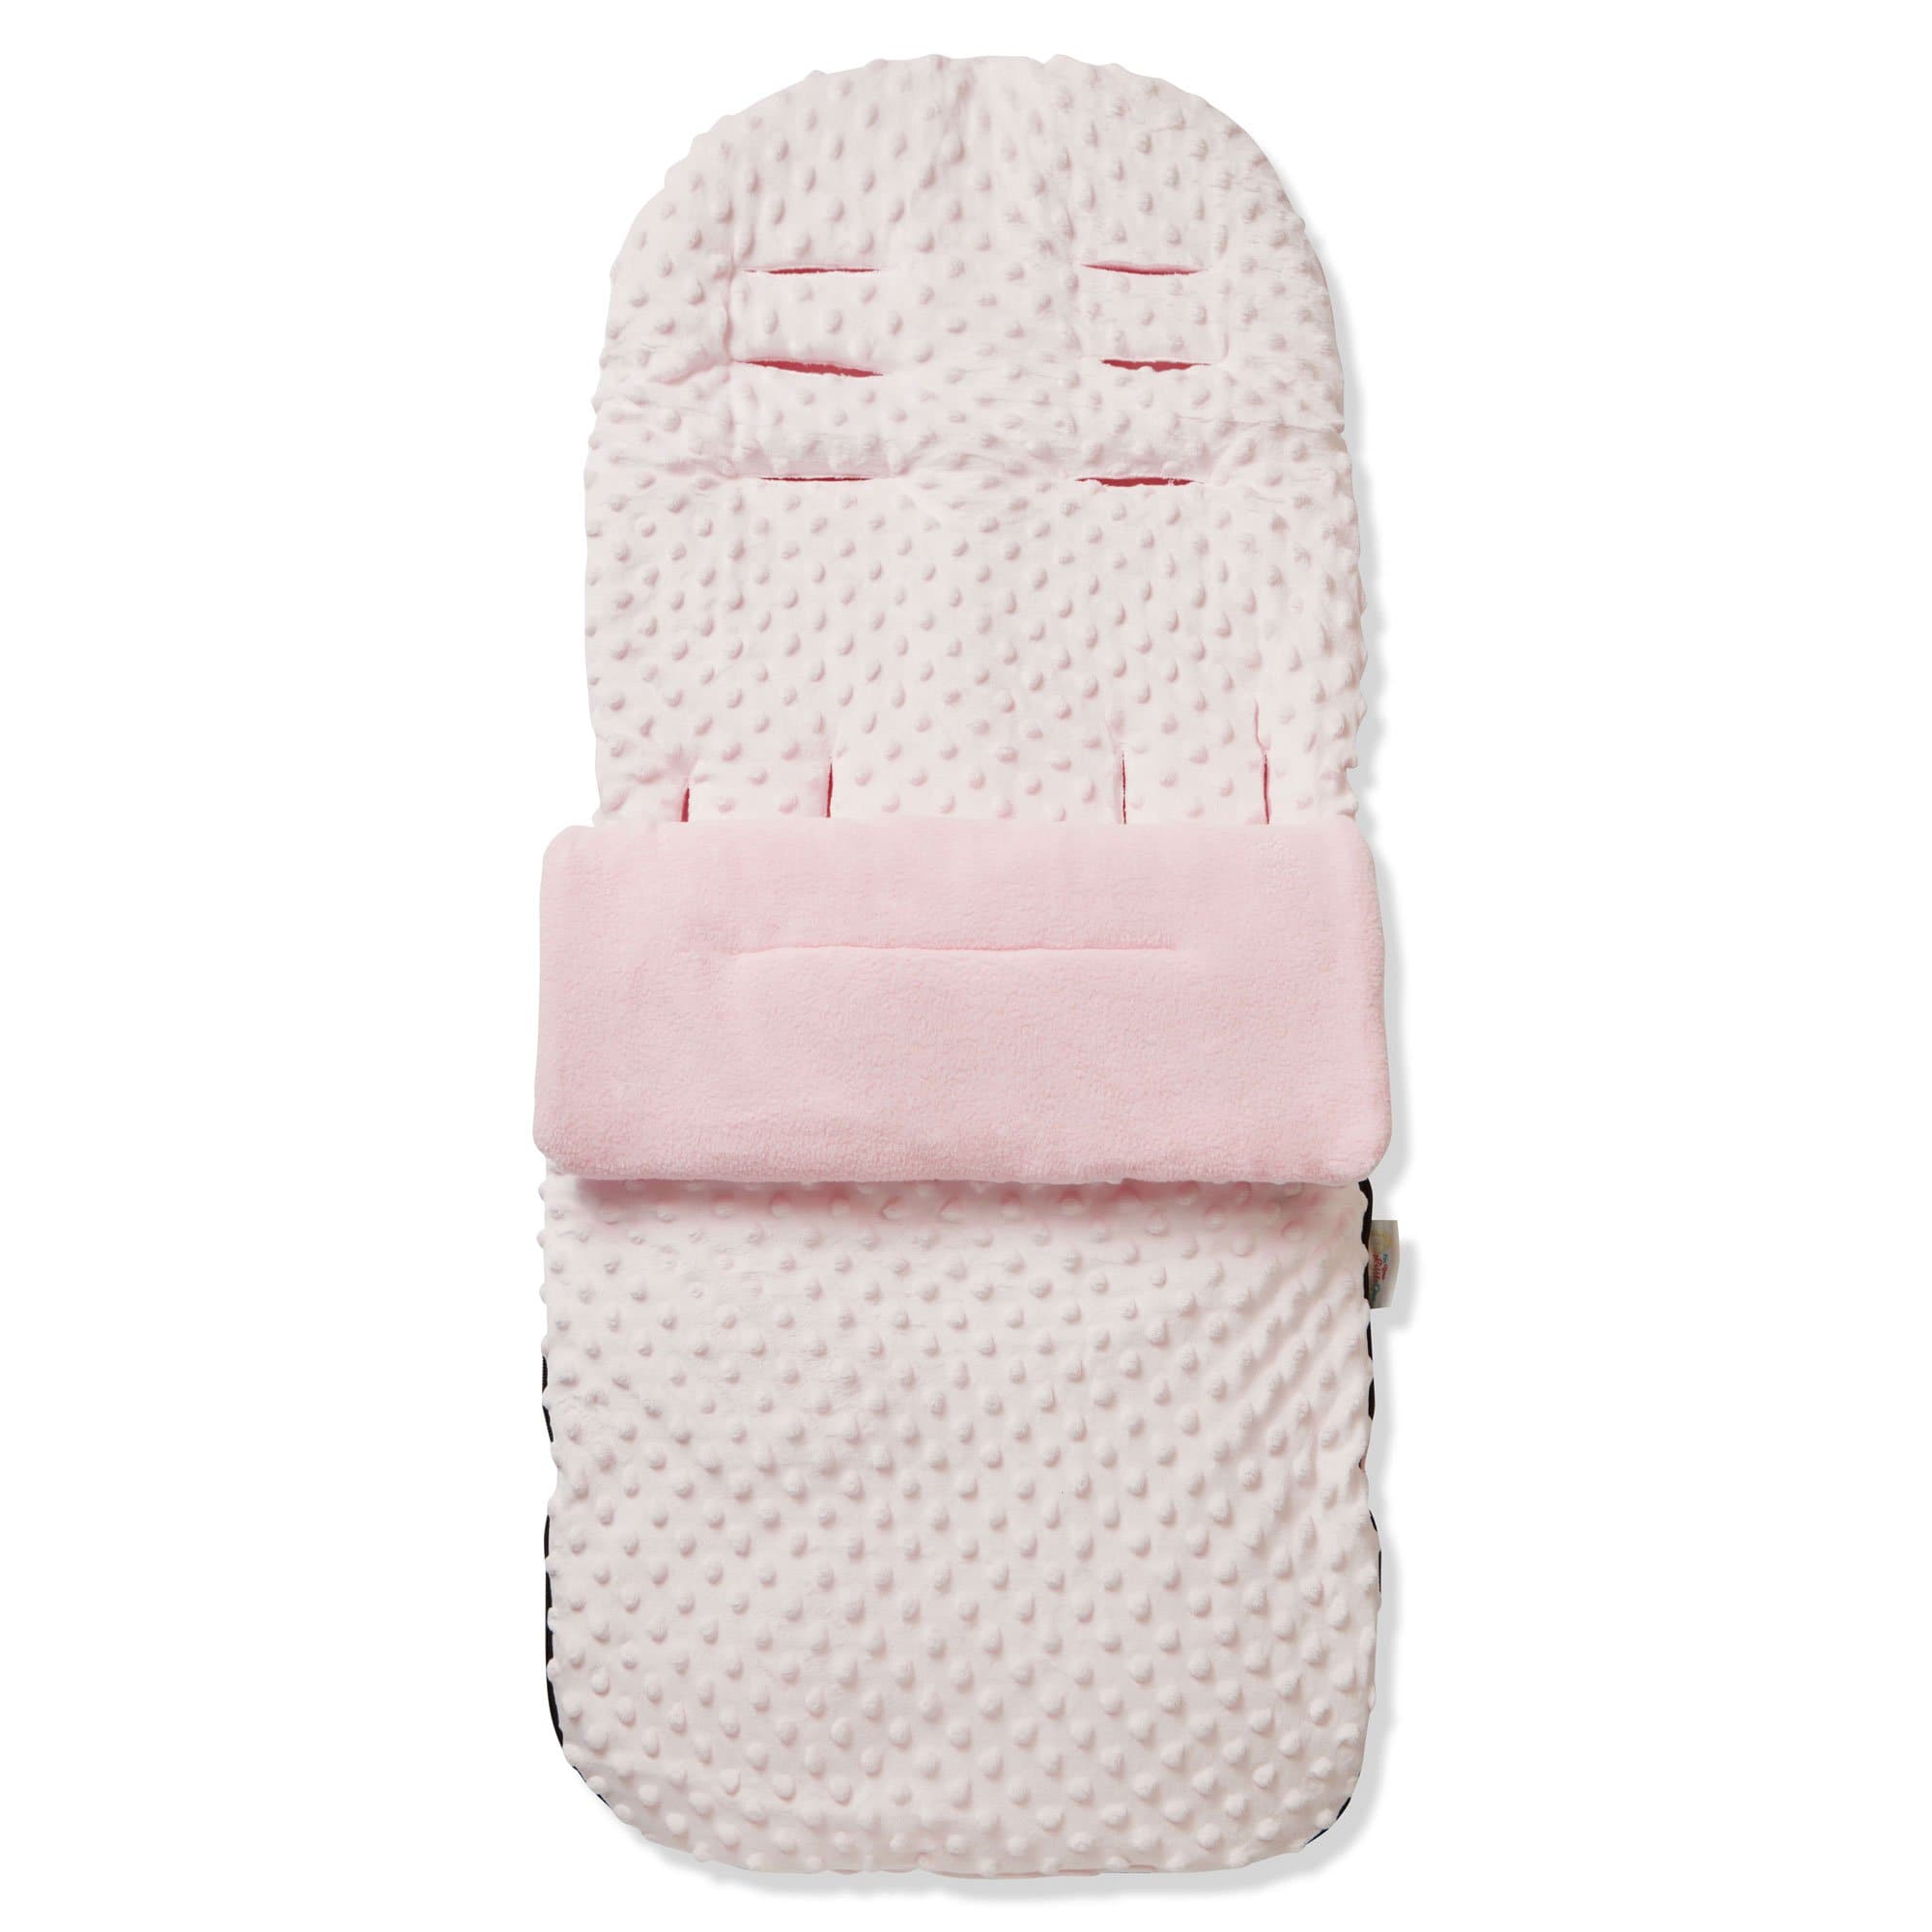 Dimple Footmuff / Cosy Toes Compatible with Tippitoes - Pink / Fits All Models | For Your Little One